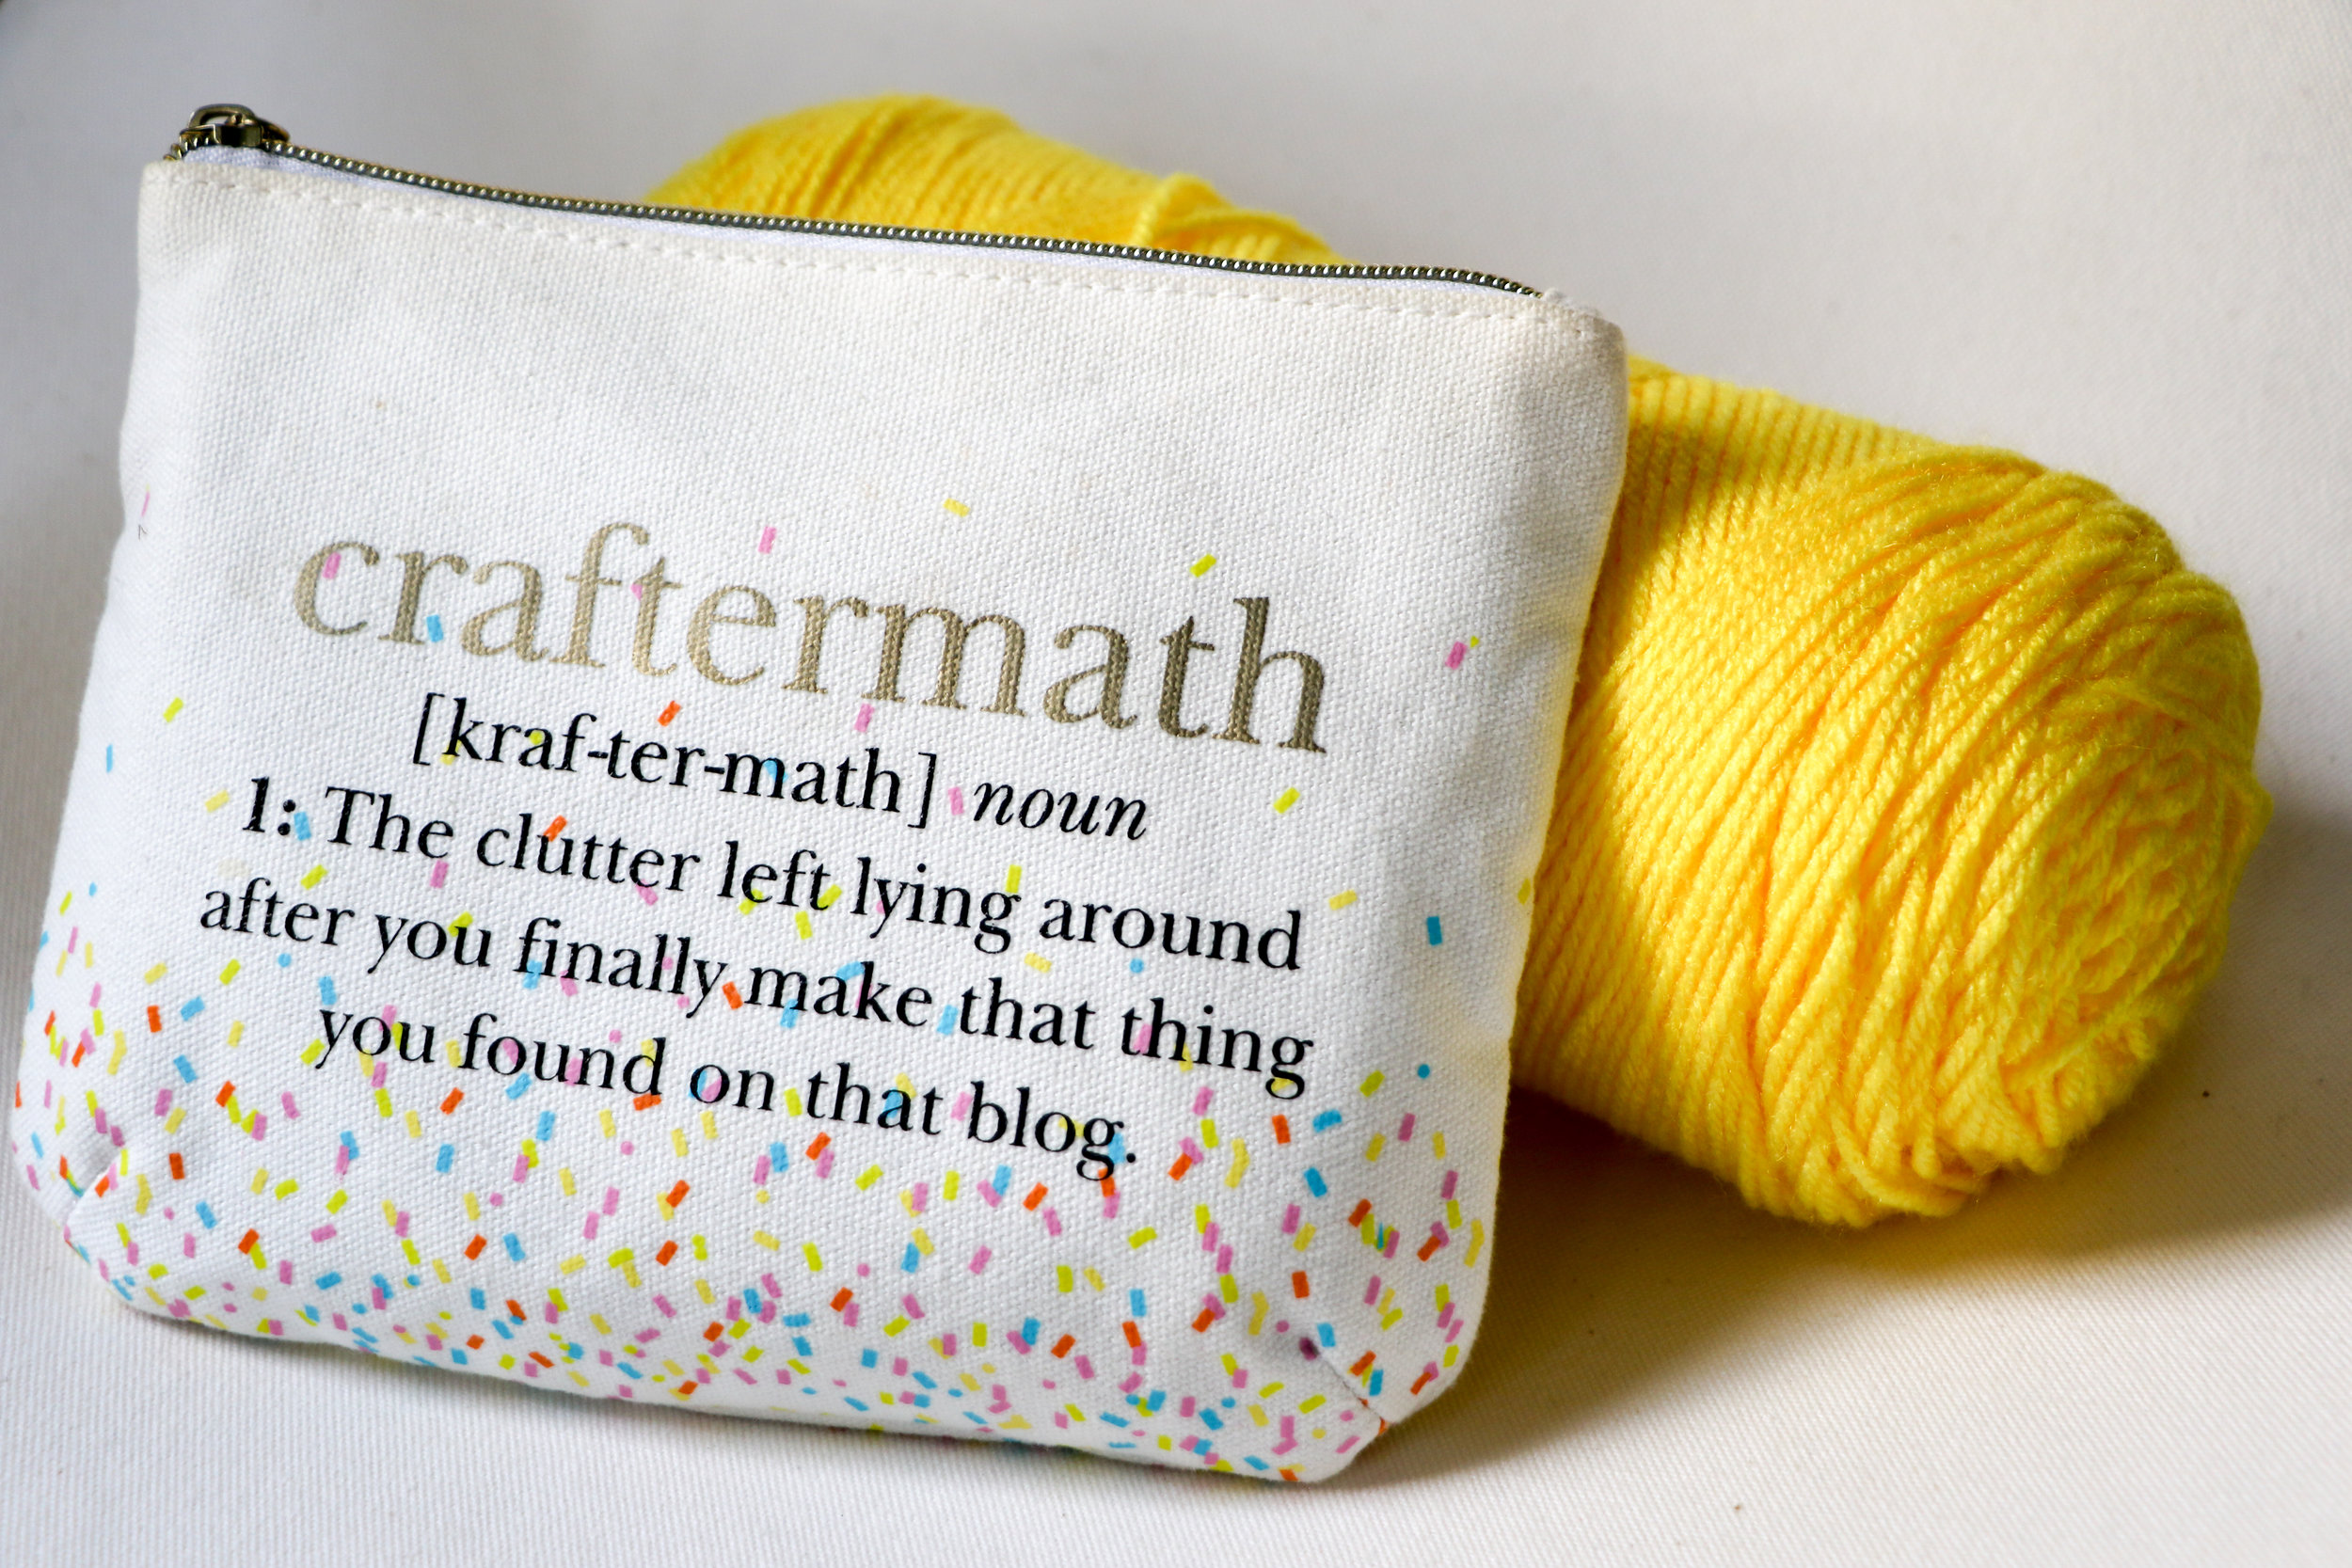 Alt text: a canvas zipper bag with confetti decals and text that reads “craftermath” and a definition for the word leans against a bright yellow ball of yarn.